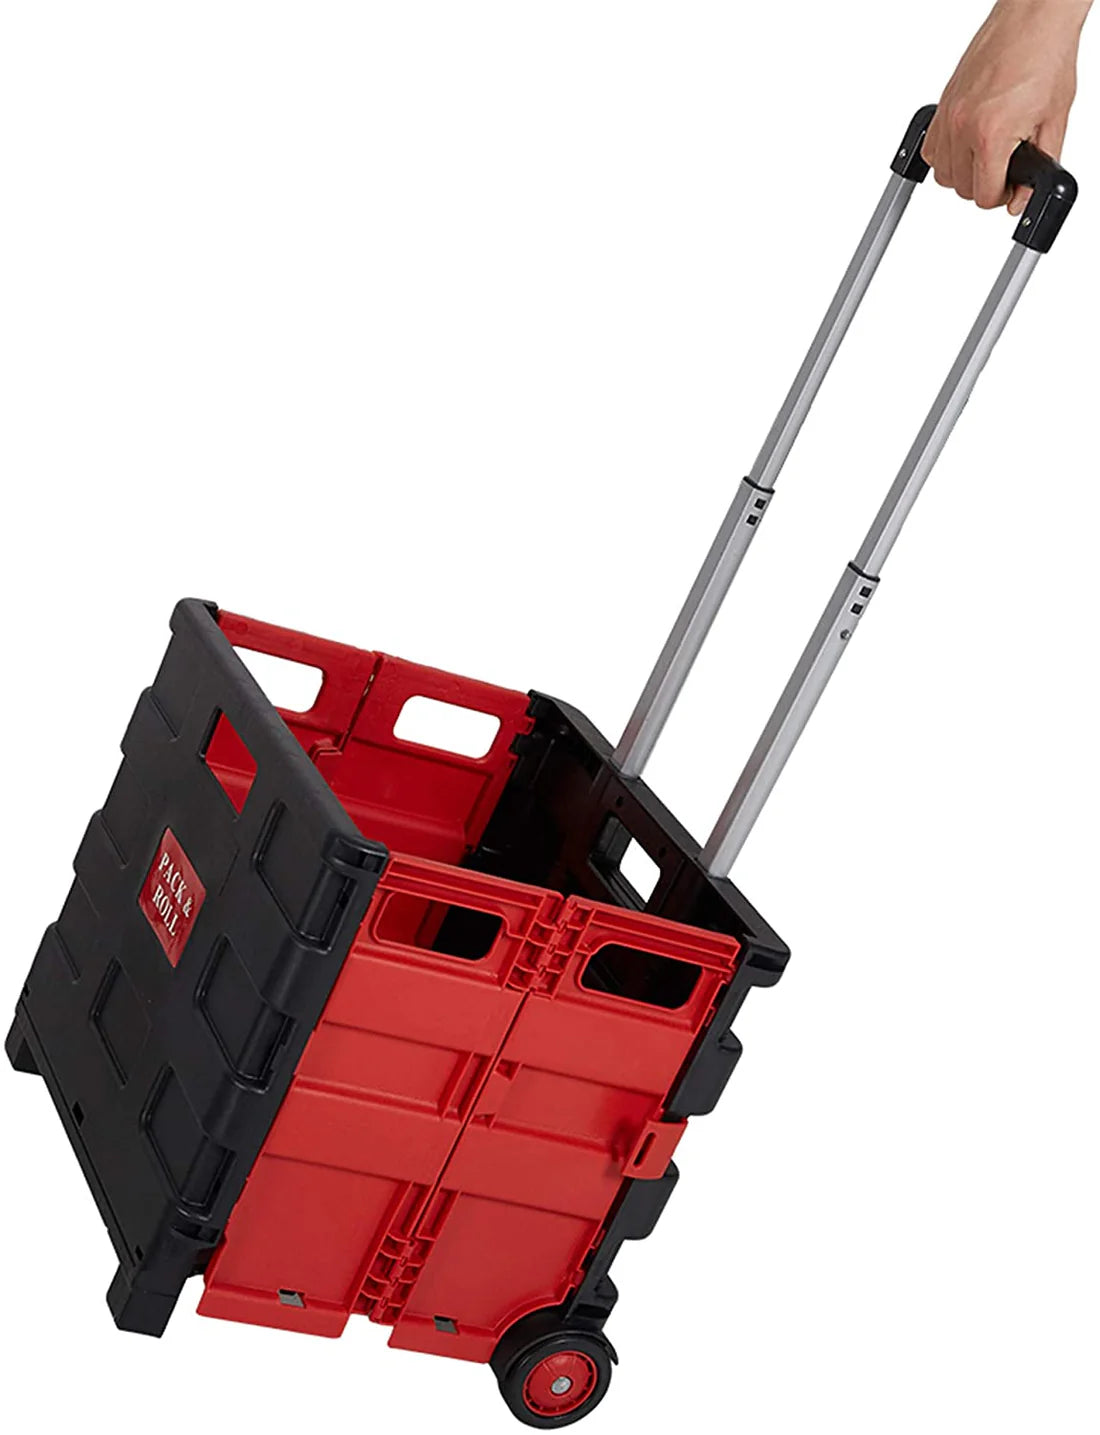 6PCS 56L Collapsible Rolling Crate Utility Cart Foldable Grocery Cart with Wheels, Red